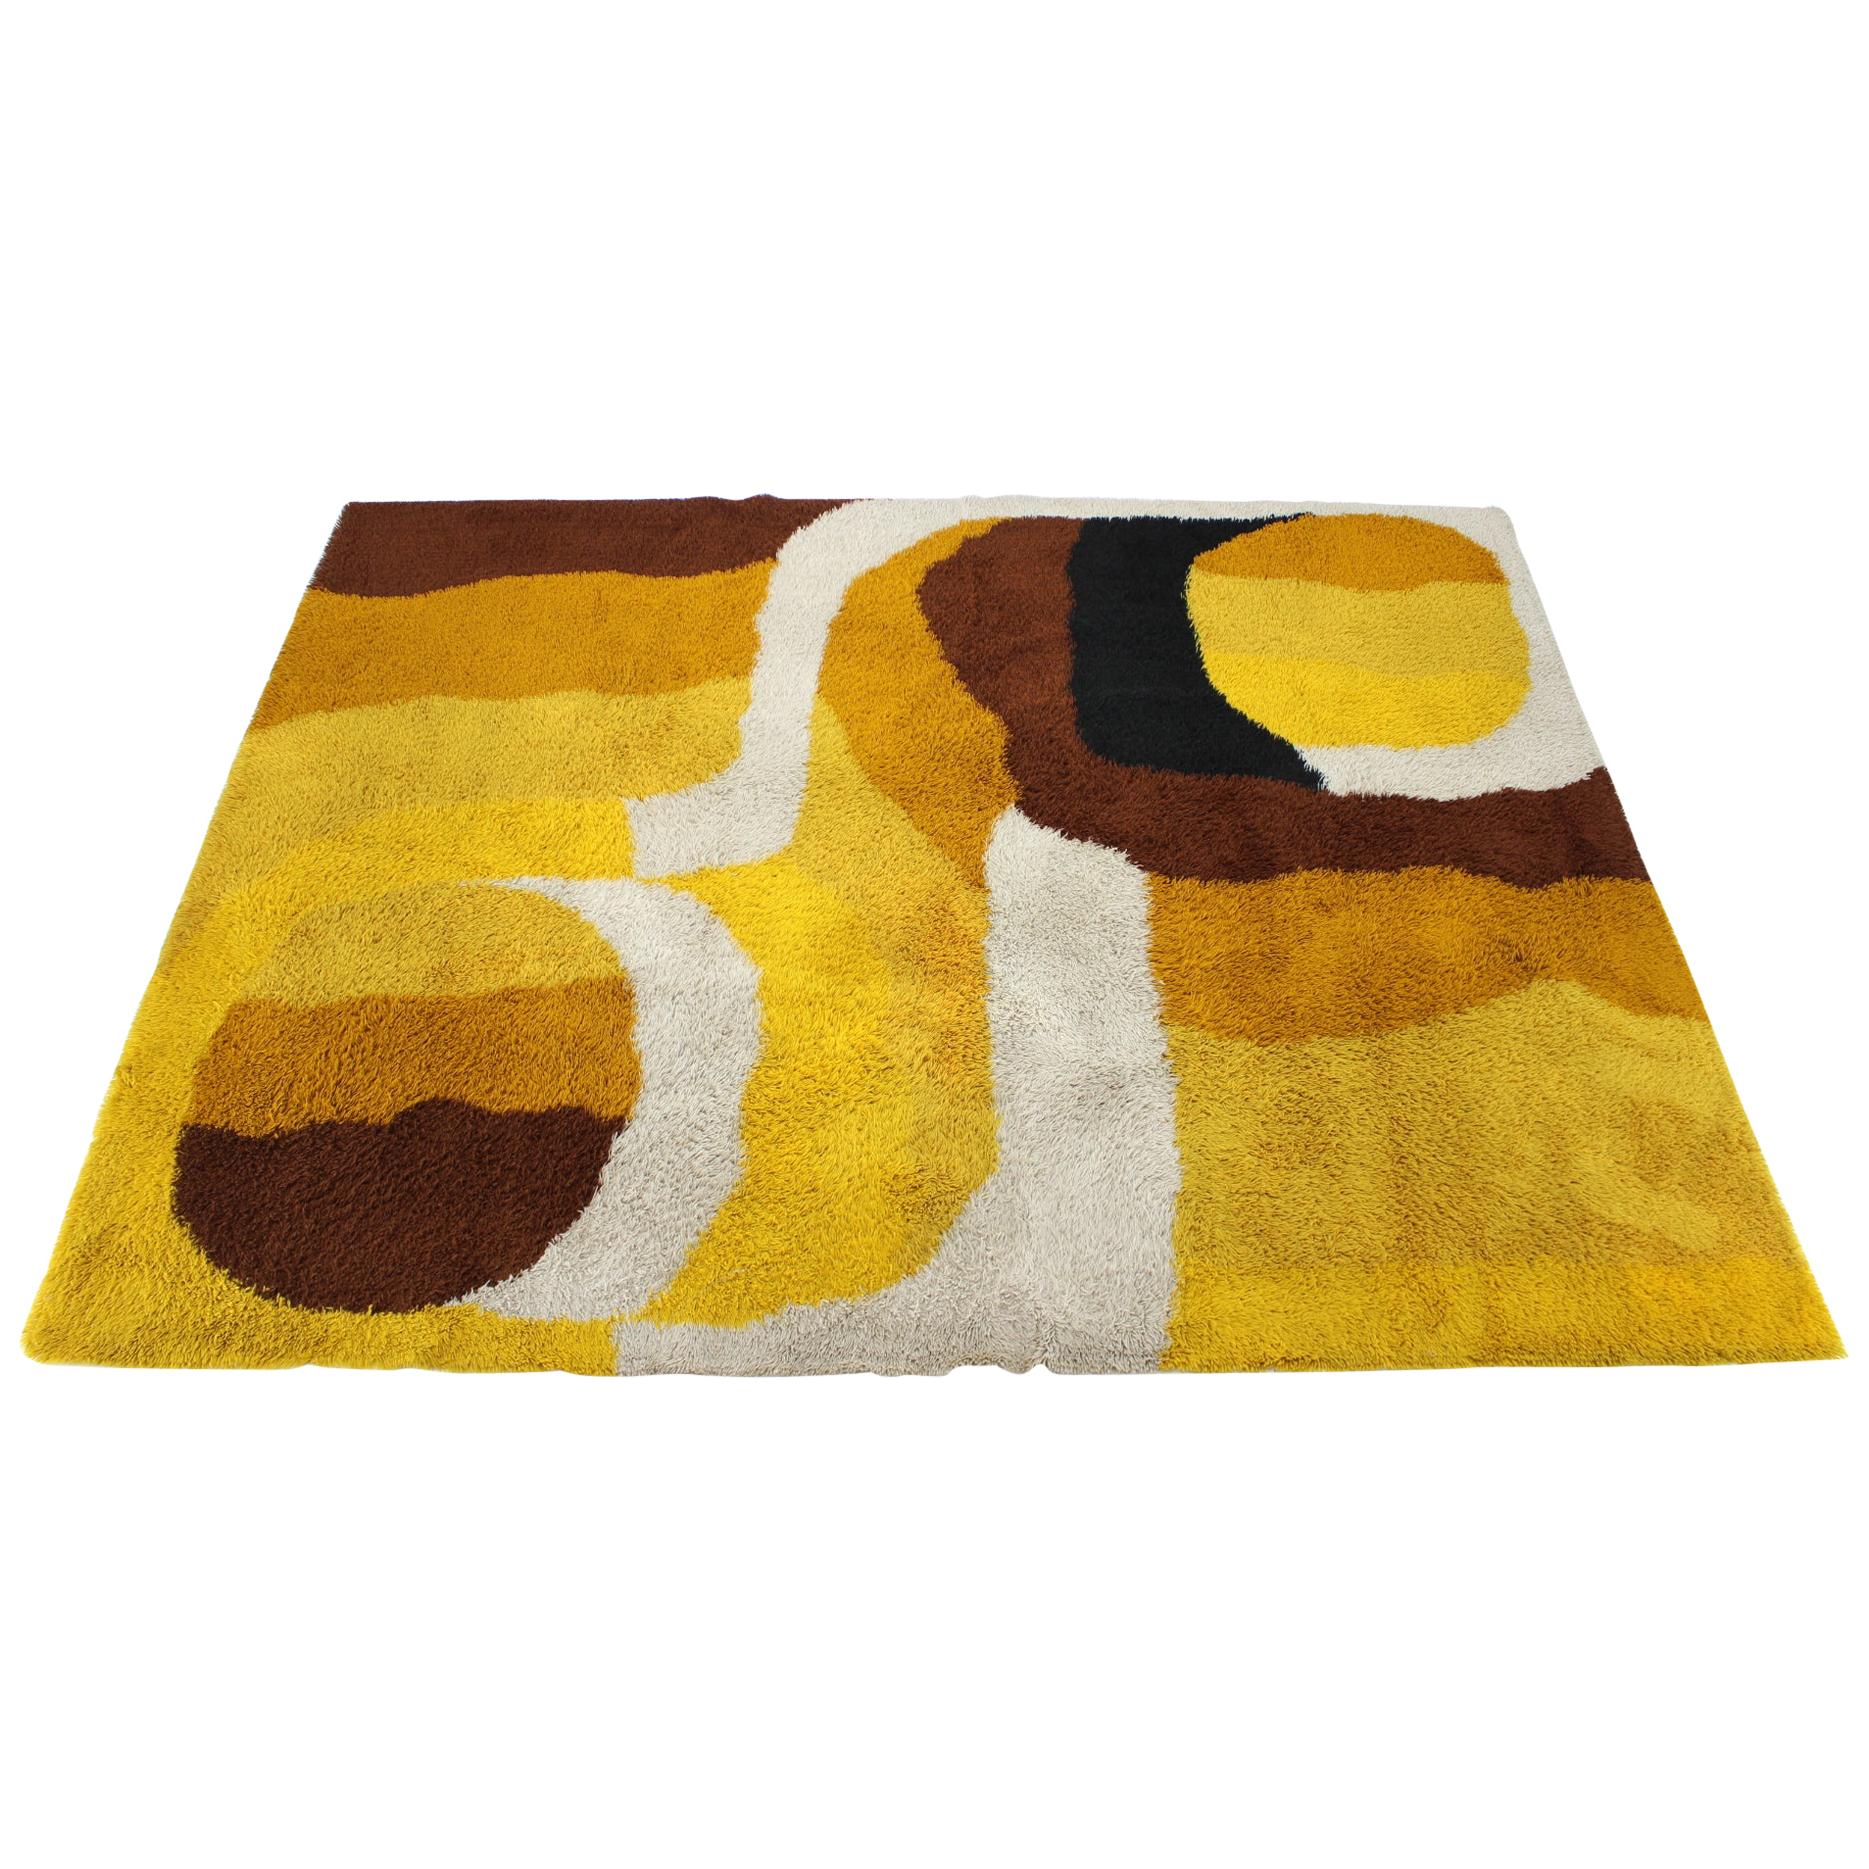 1960s Abstract Wool Carpet by Greif, Denmark